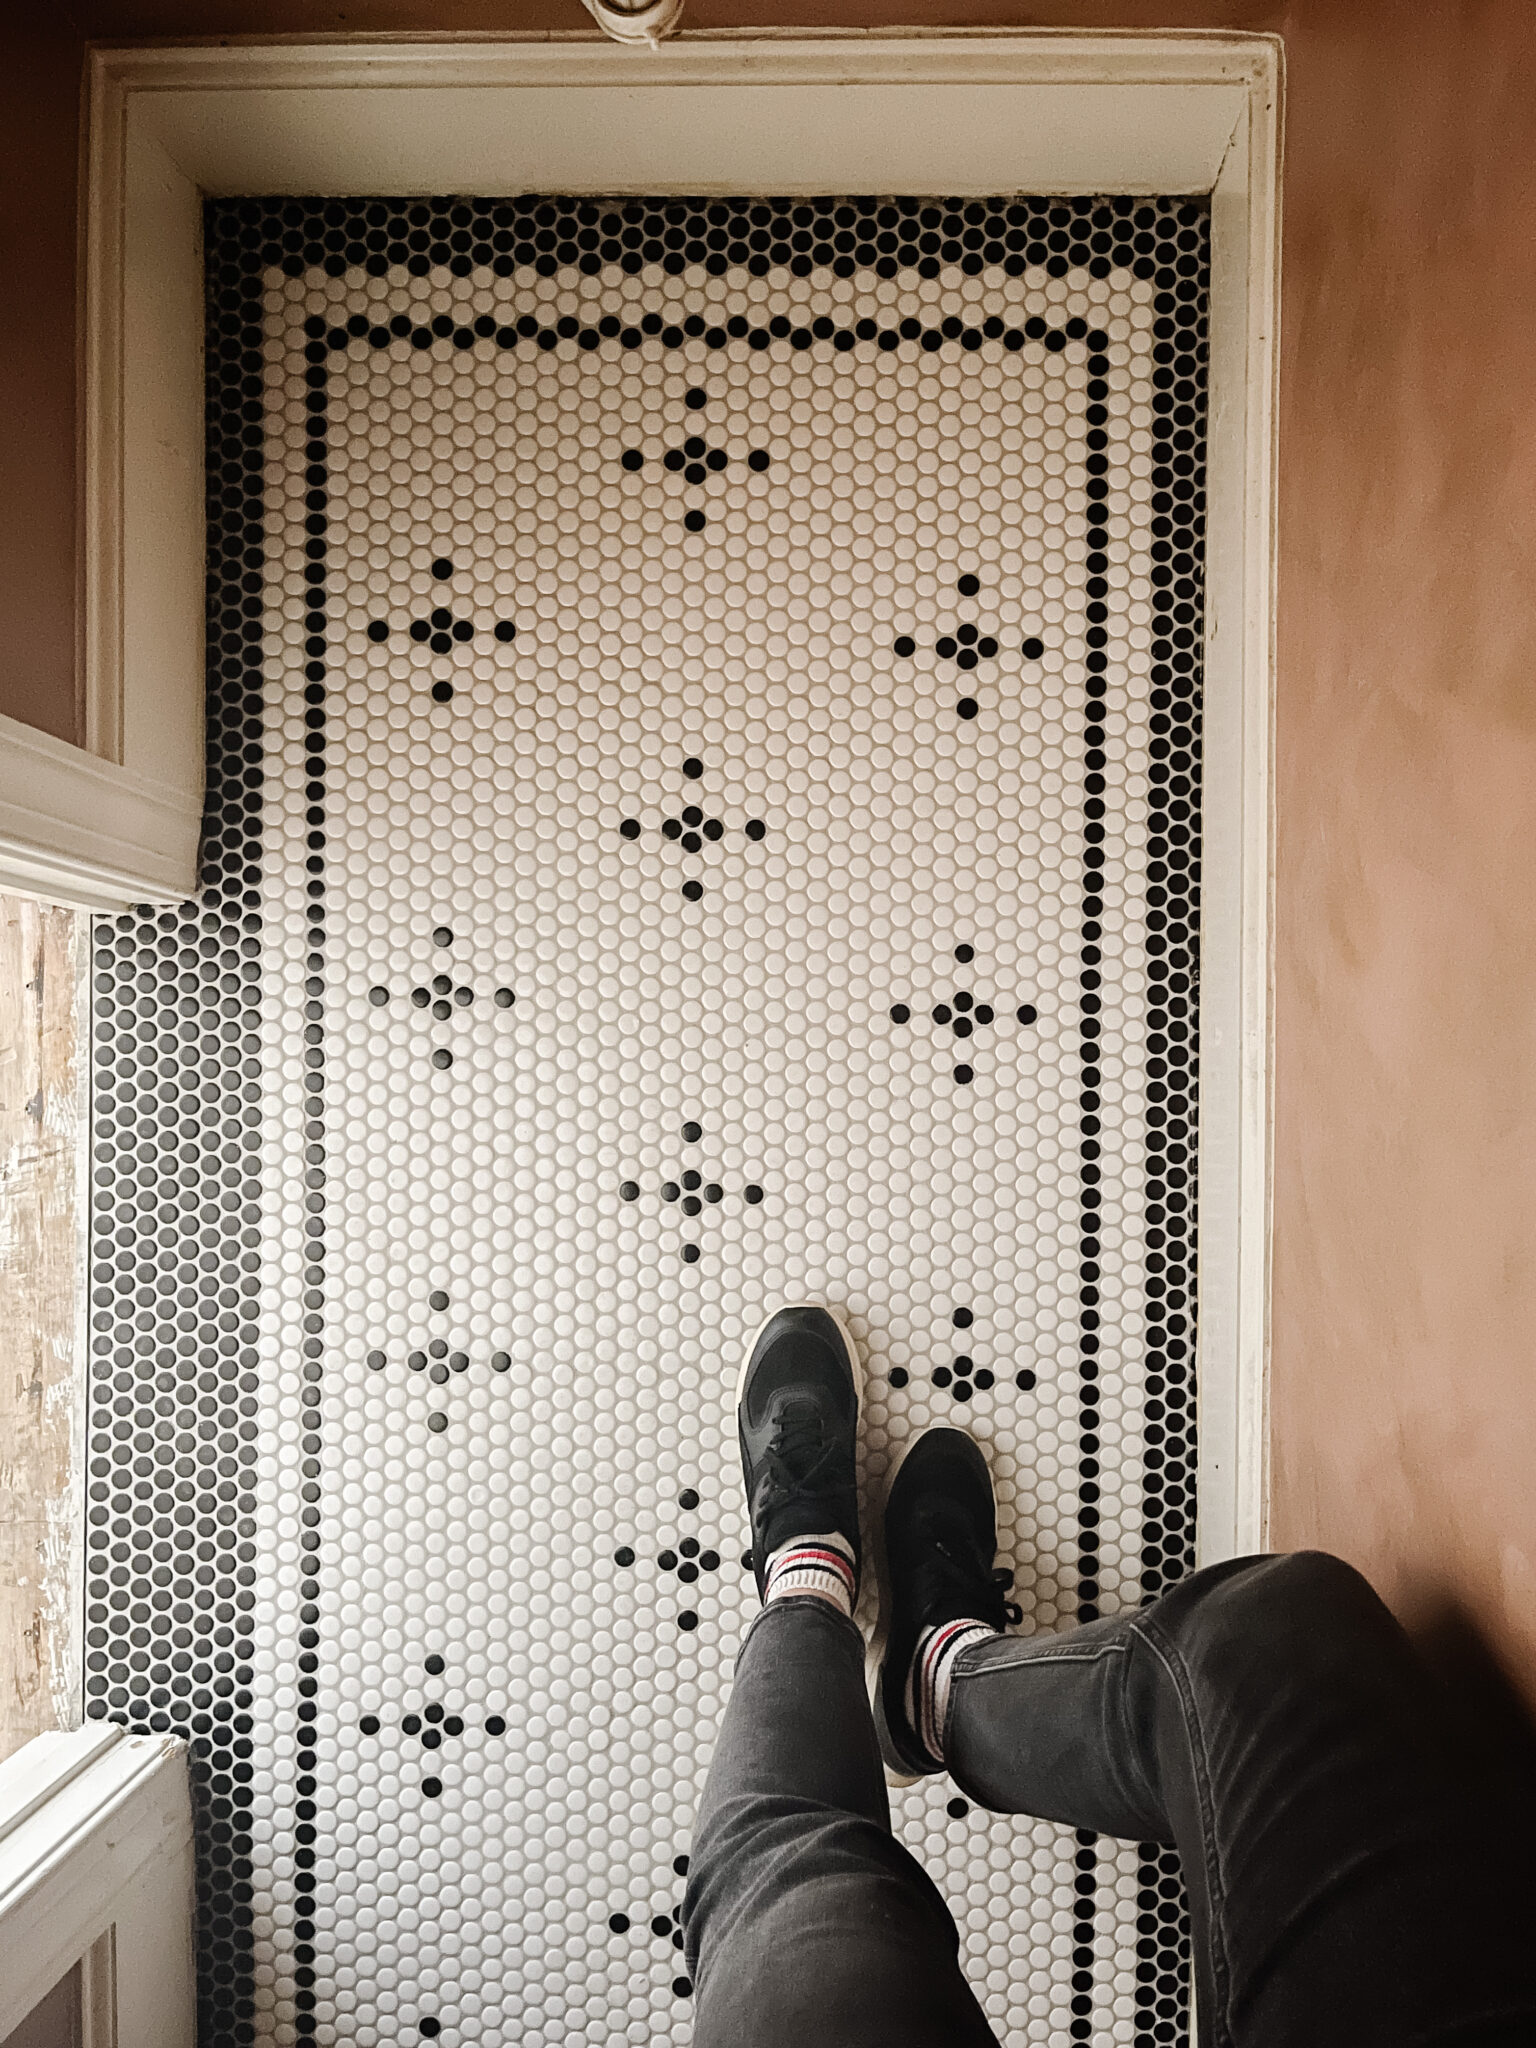 Diy Your Own Penny Tile Patterned Floor, Tile Border Ideas Floor And Decoration